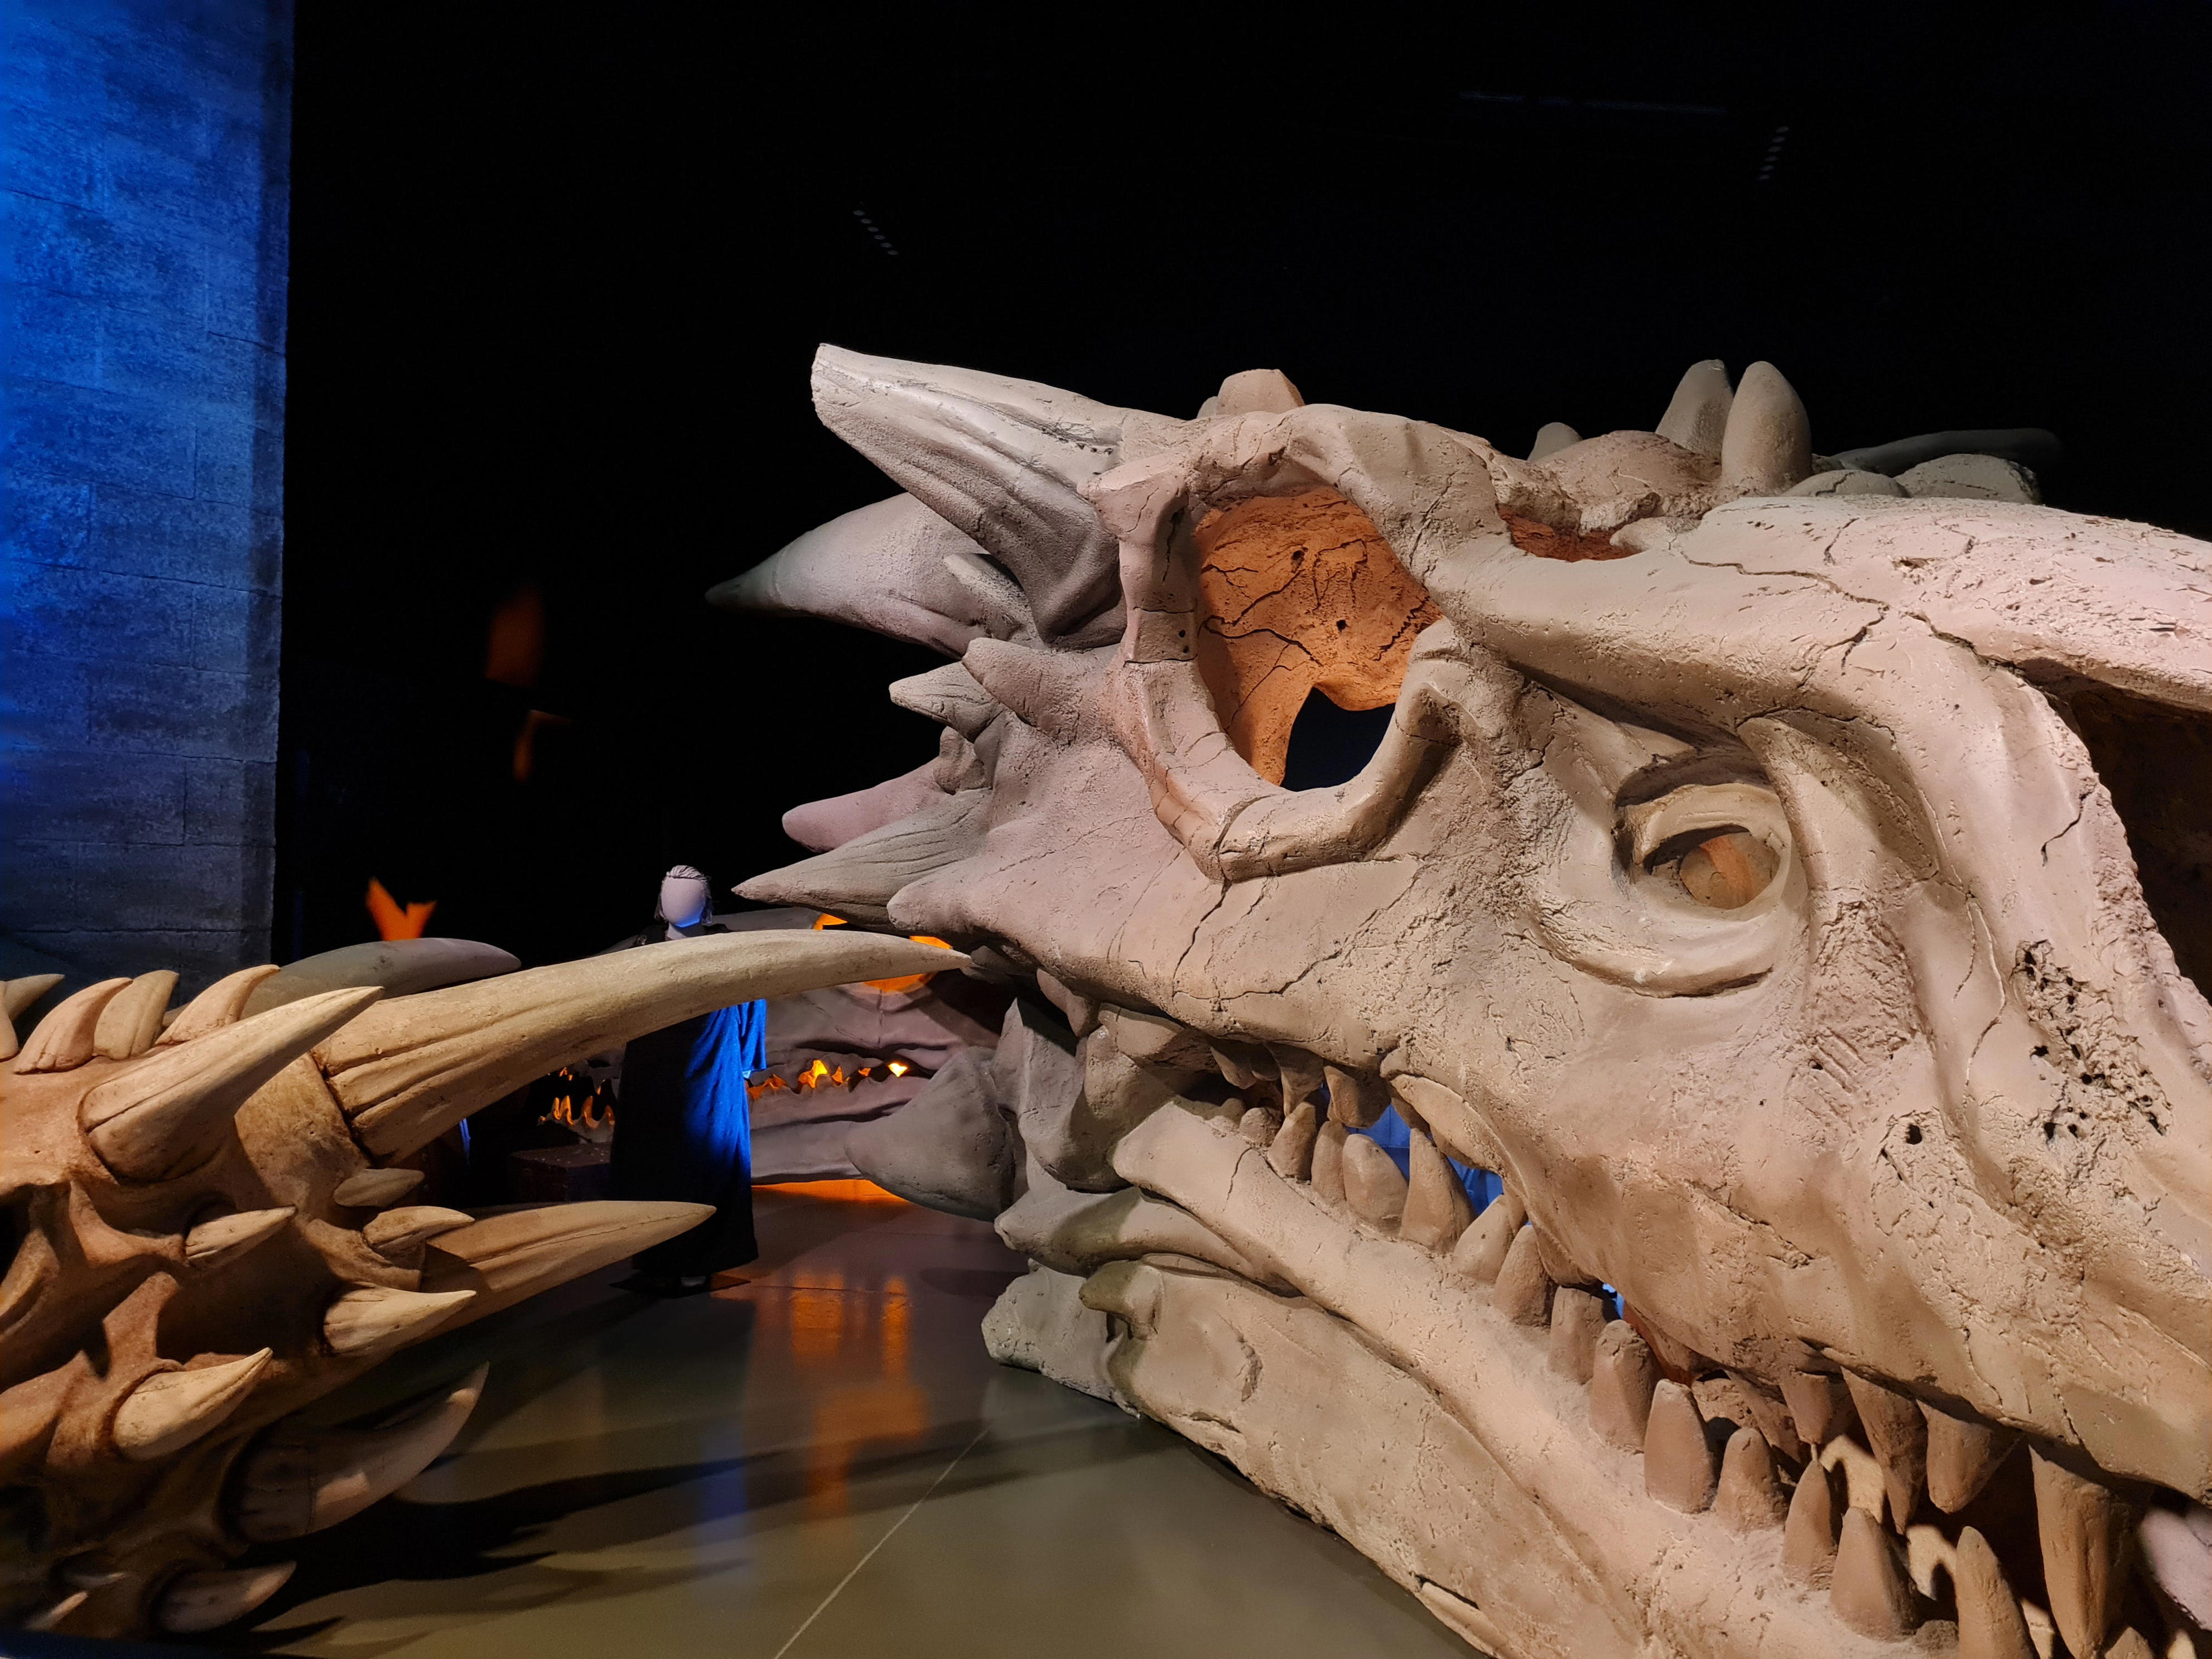 <p>In addition to walking through the sets, I got an insight into the show's creation process.</p><p>The 30-foot dragon skull of Balerion the Black Dread took six weeks to make before being shipped to Spain for filming. While standing next to the masterpiece, I could hardly believe that something of its scale could be <a href="https://www.businessinsider.com/solo-travel-surprising-things-american-in-europe-2023-3">transported across Europe</a>.</p><p>Equally staggering, we learned that the crew went through 52,000 bags of <a href="https://www.businessinsider.com/fake-snow-movie-tv-fantastic-beasts-call-midwife-winter-christmas-2023-1">fake snow</a> and 163 tons of propane (for pyrotechnic effects) throughout the series. </p><p>Hearing about these intense behind-the-scenes efforts brought the series' magic back to life and made the visit worthwhile for me.</p>